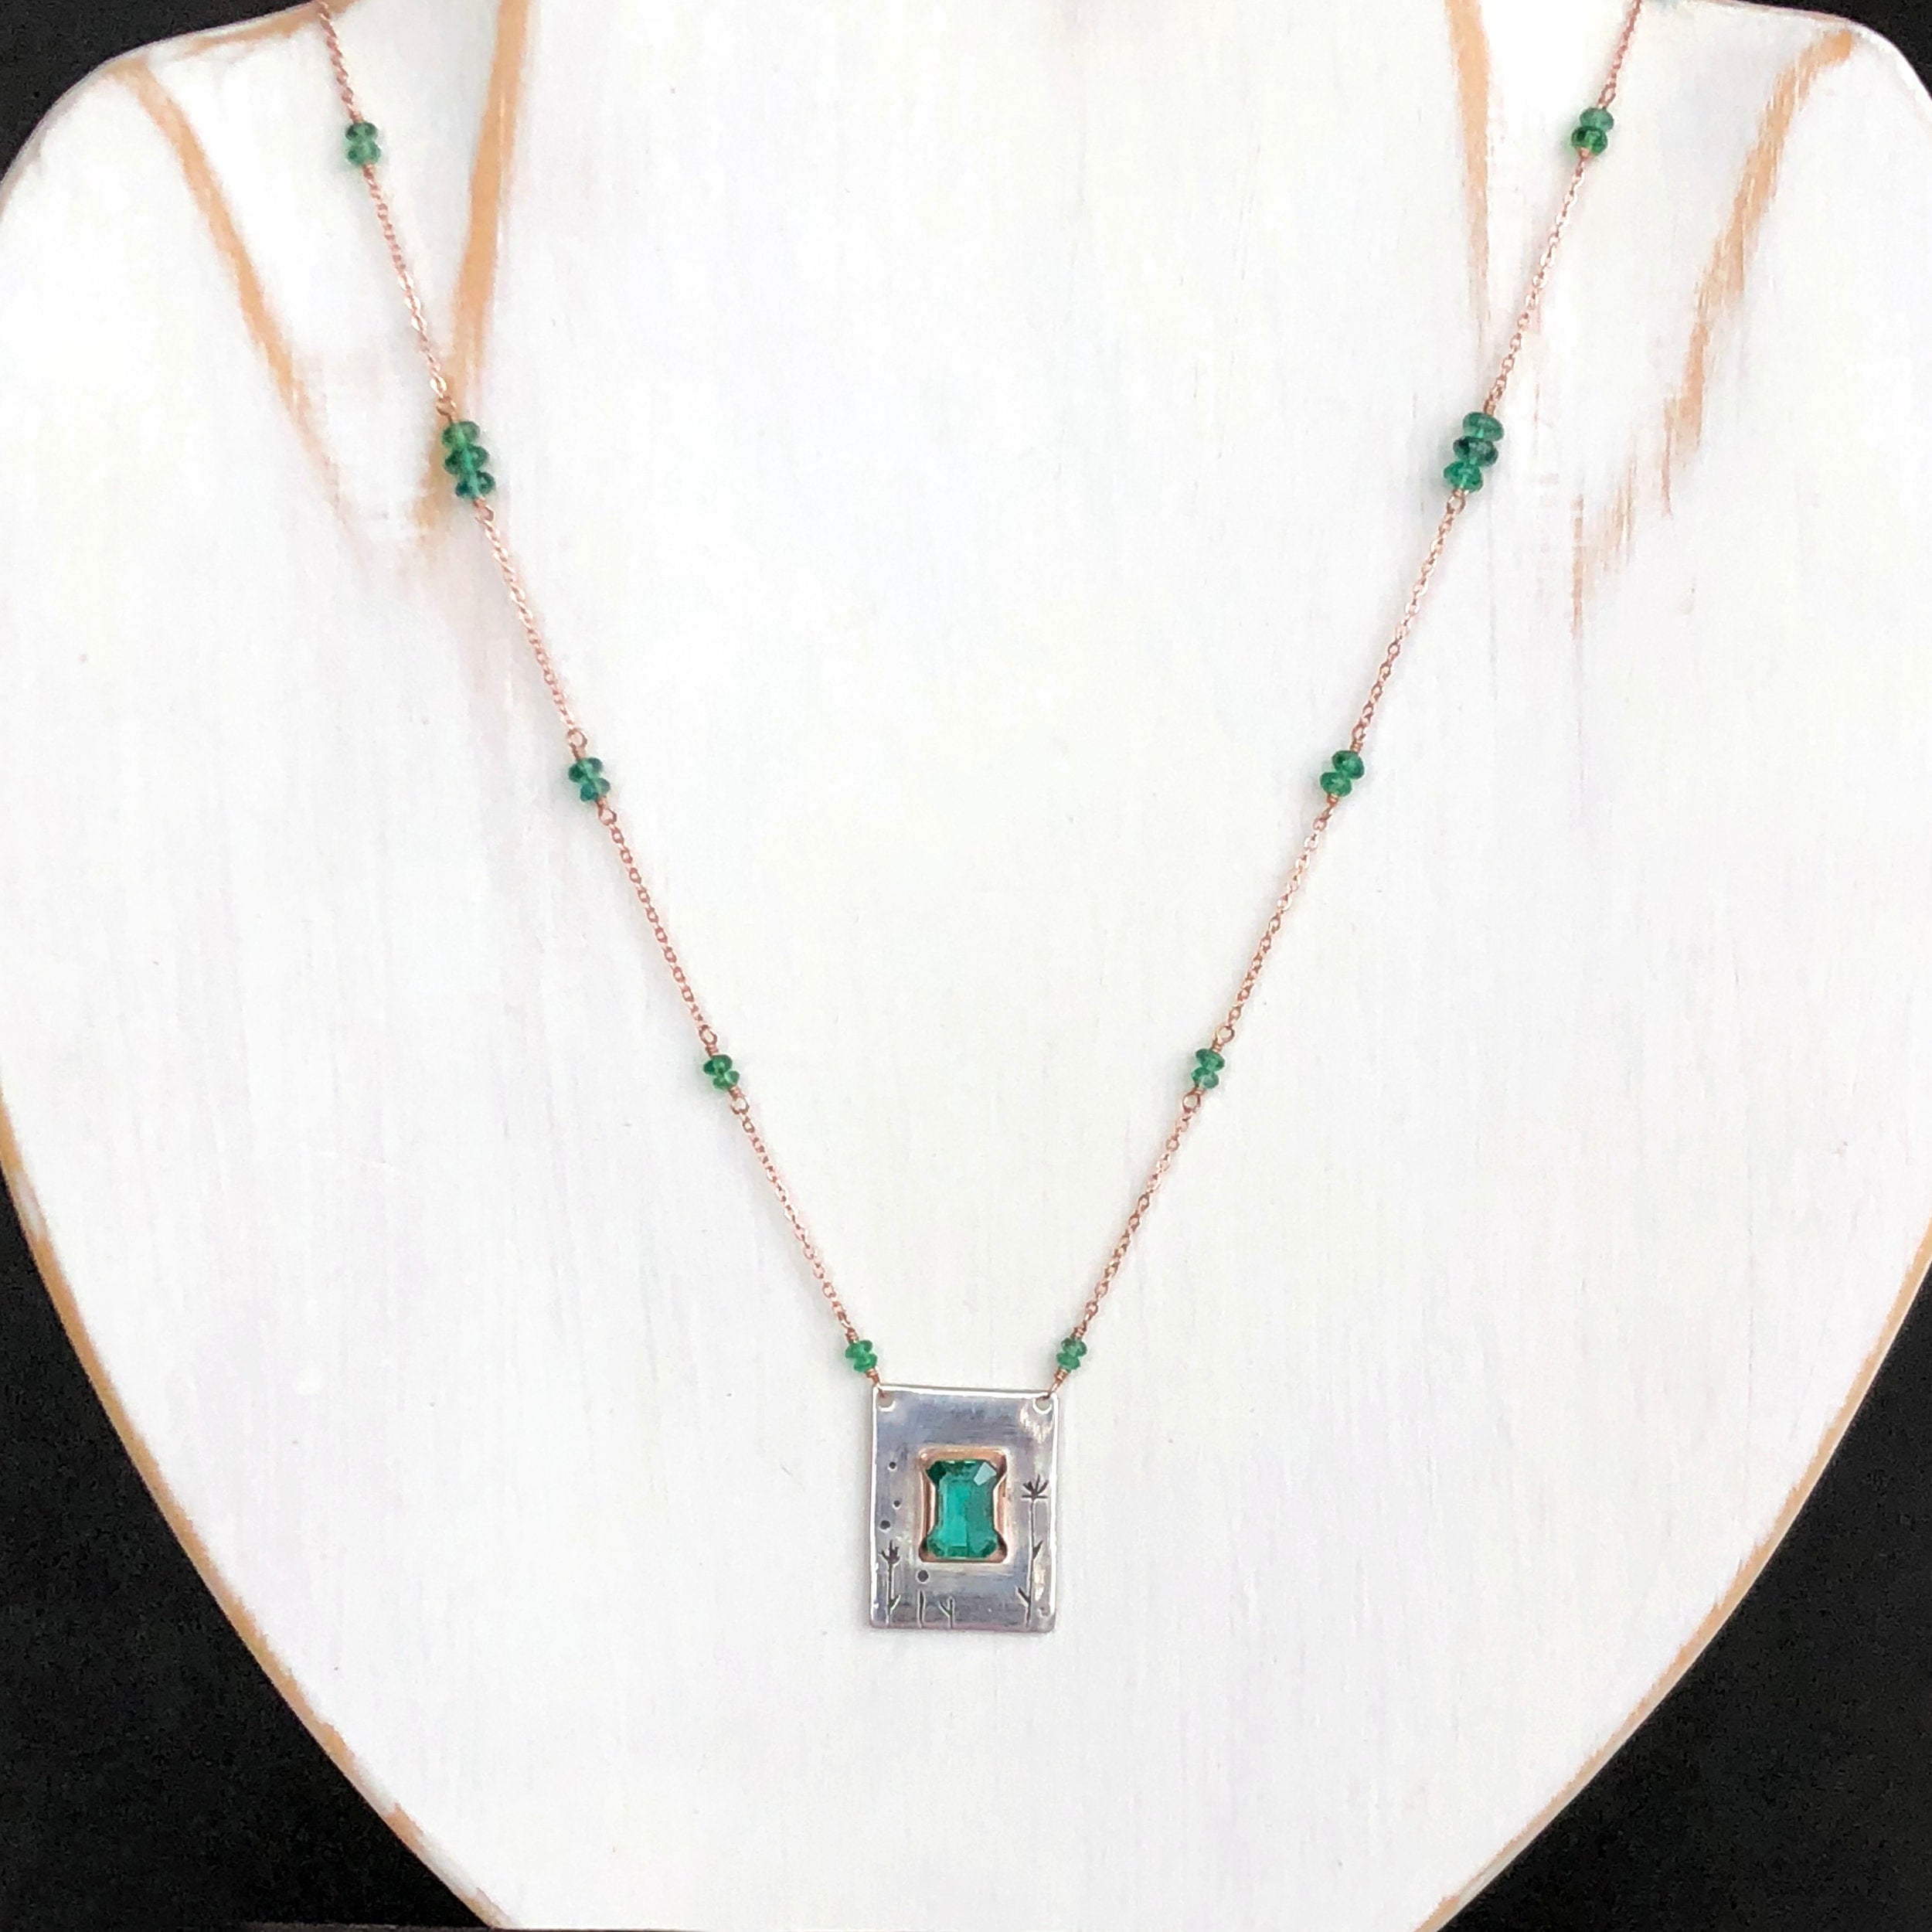 14K Emerald Necklace, Hand Etched Necklace, May Birthstone, Solid Gold Silver